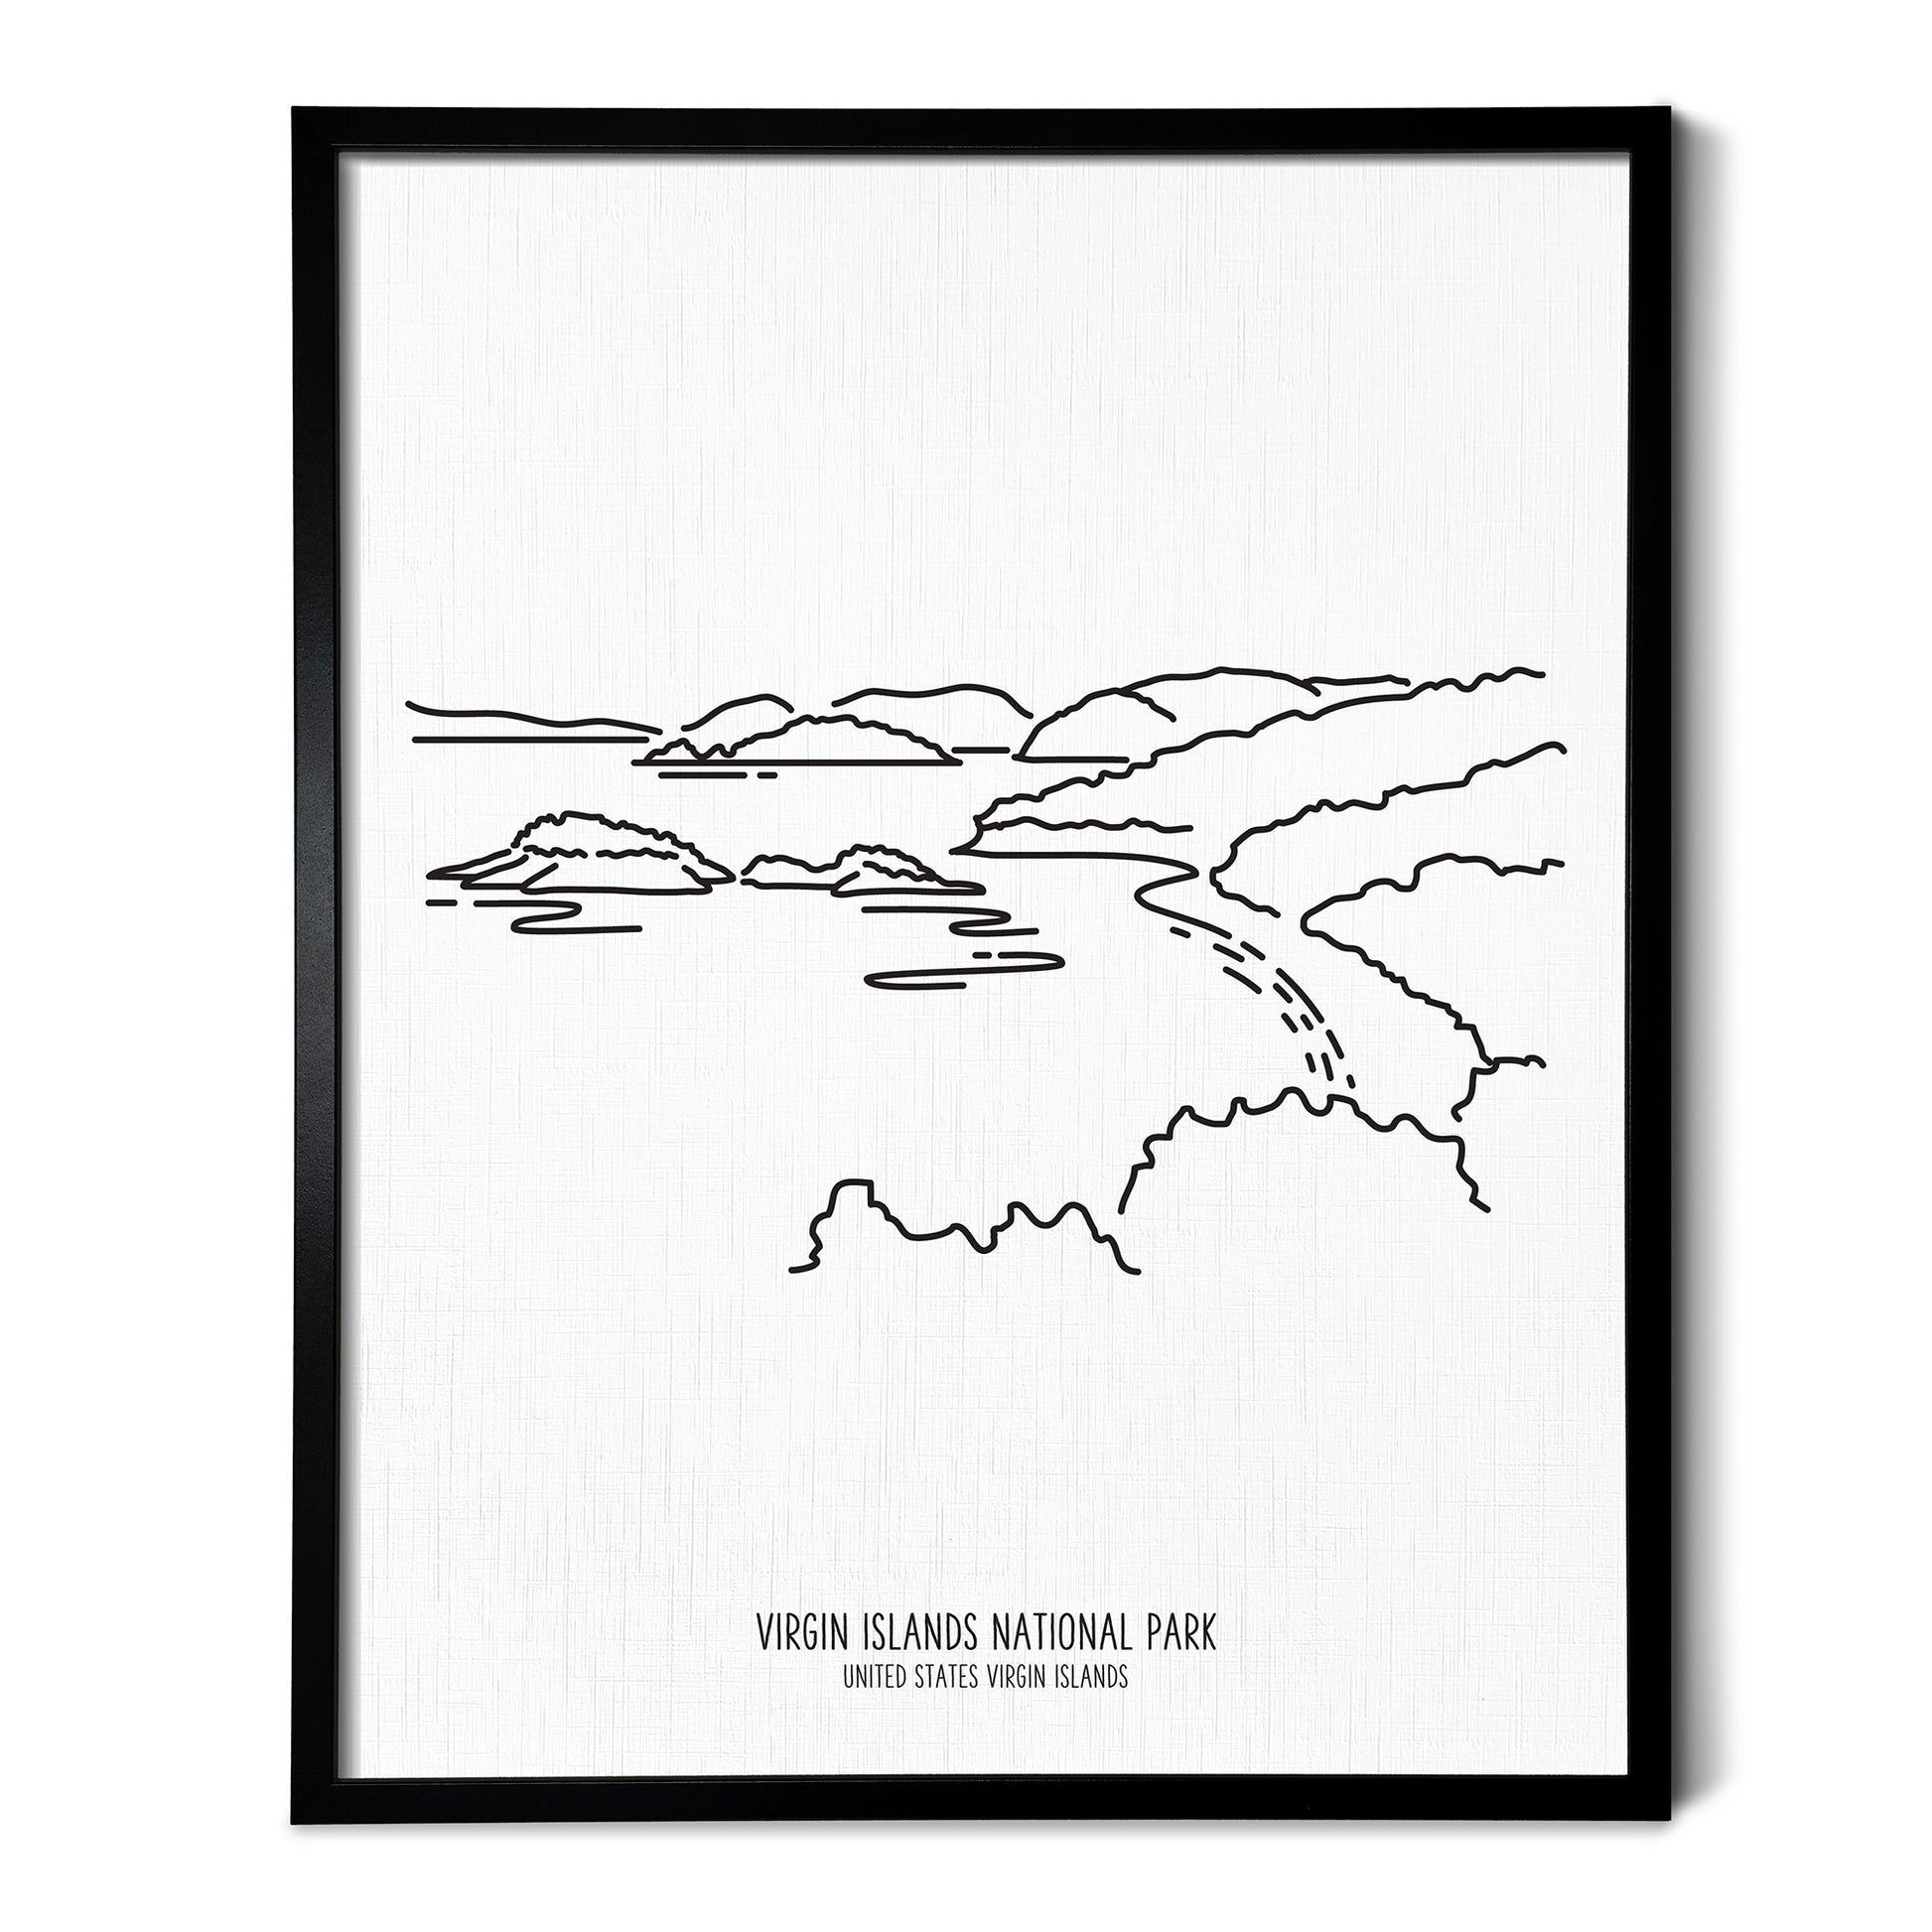 A line art drawing of Virgin Islands National Park on white linen paper in a thin black picture frame